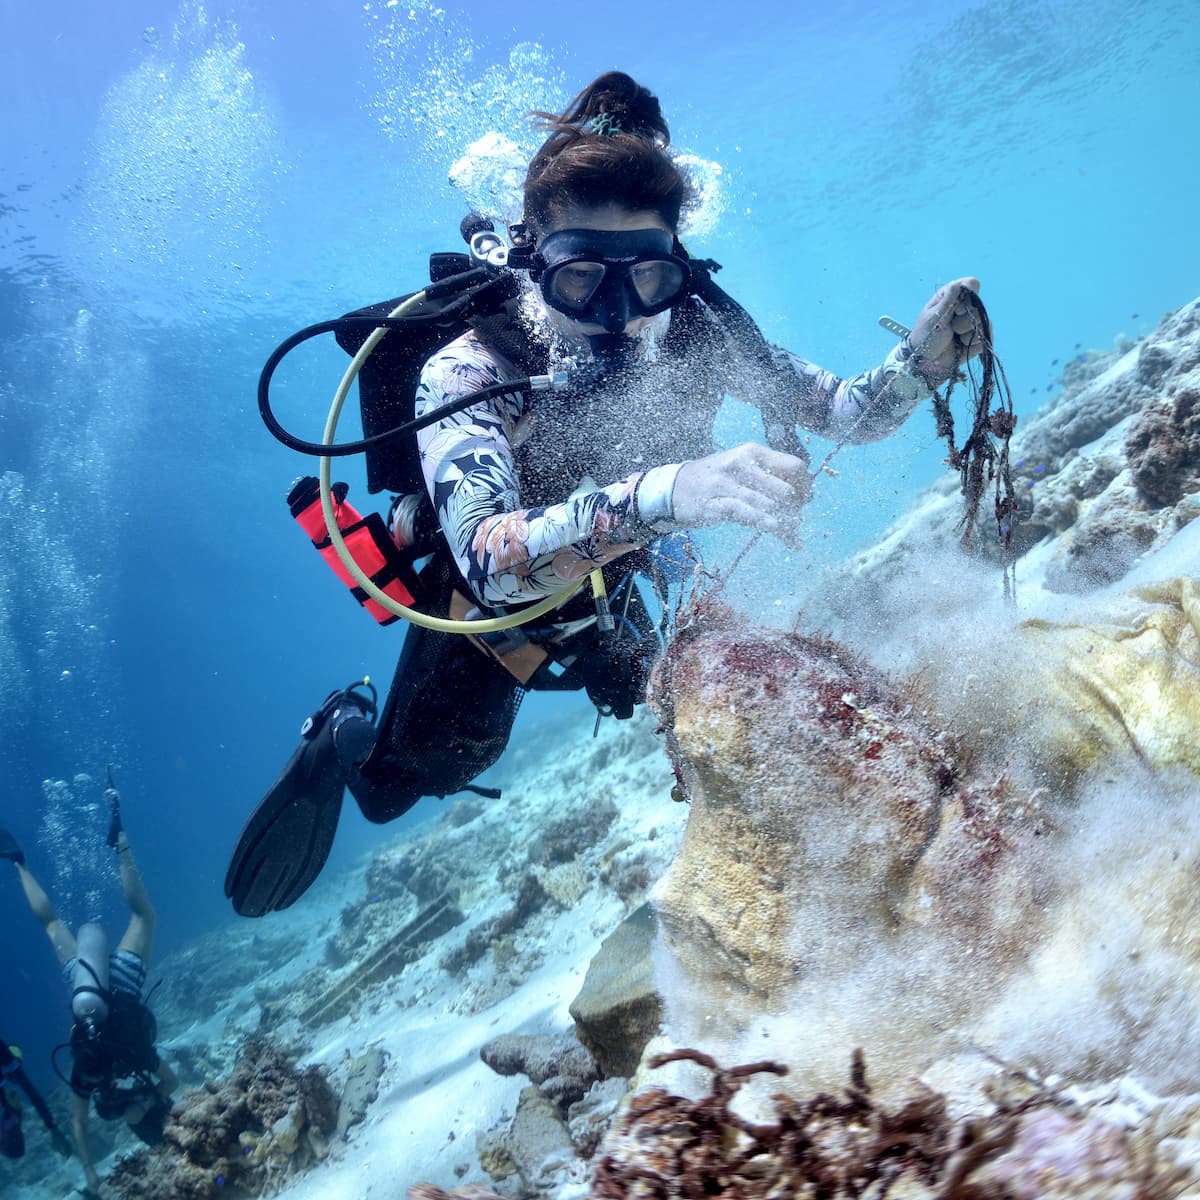 Collecting data on adopted divesites